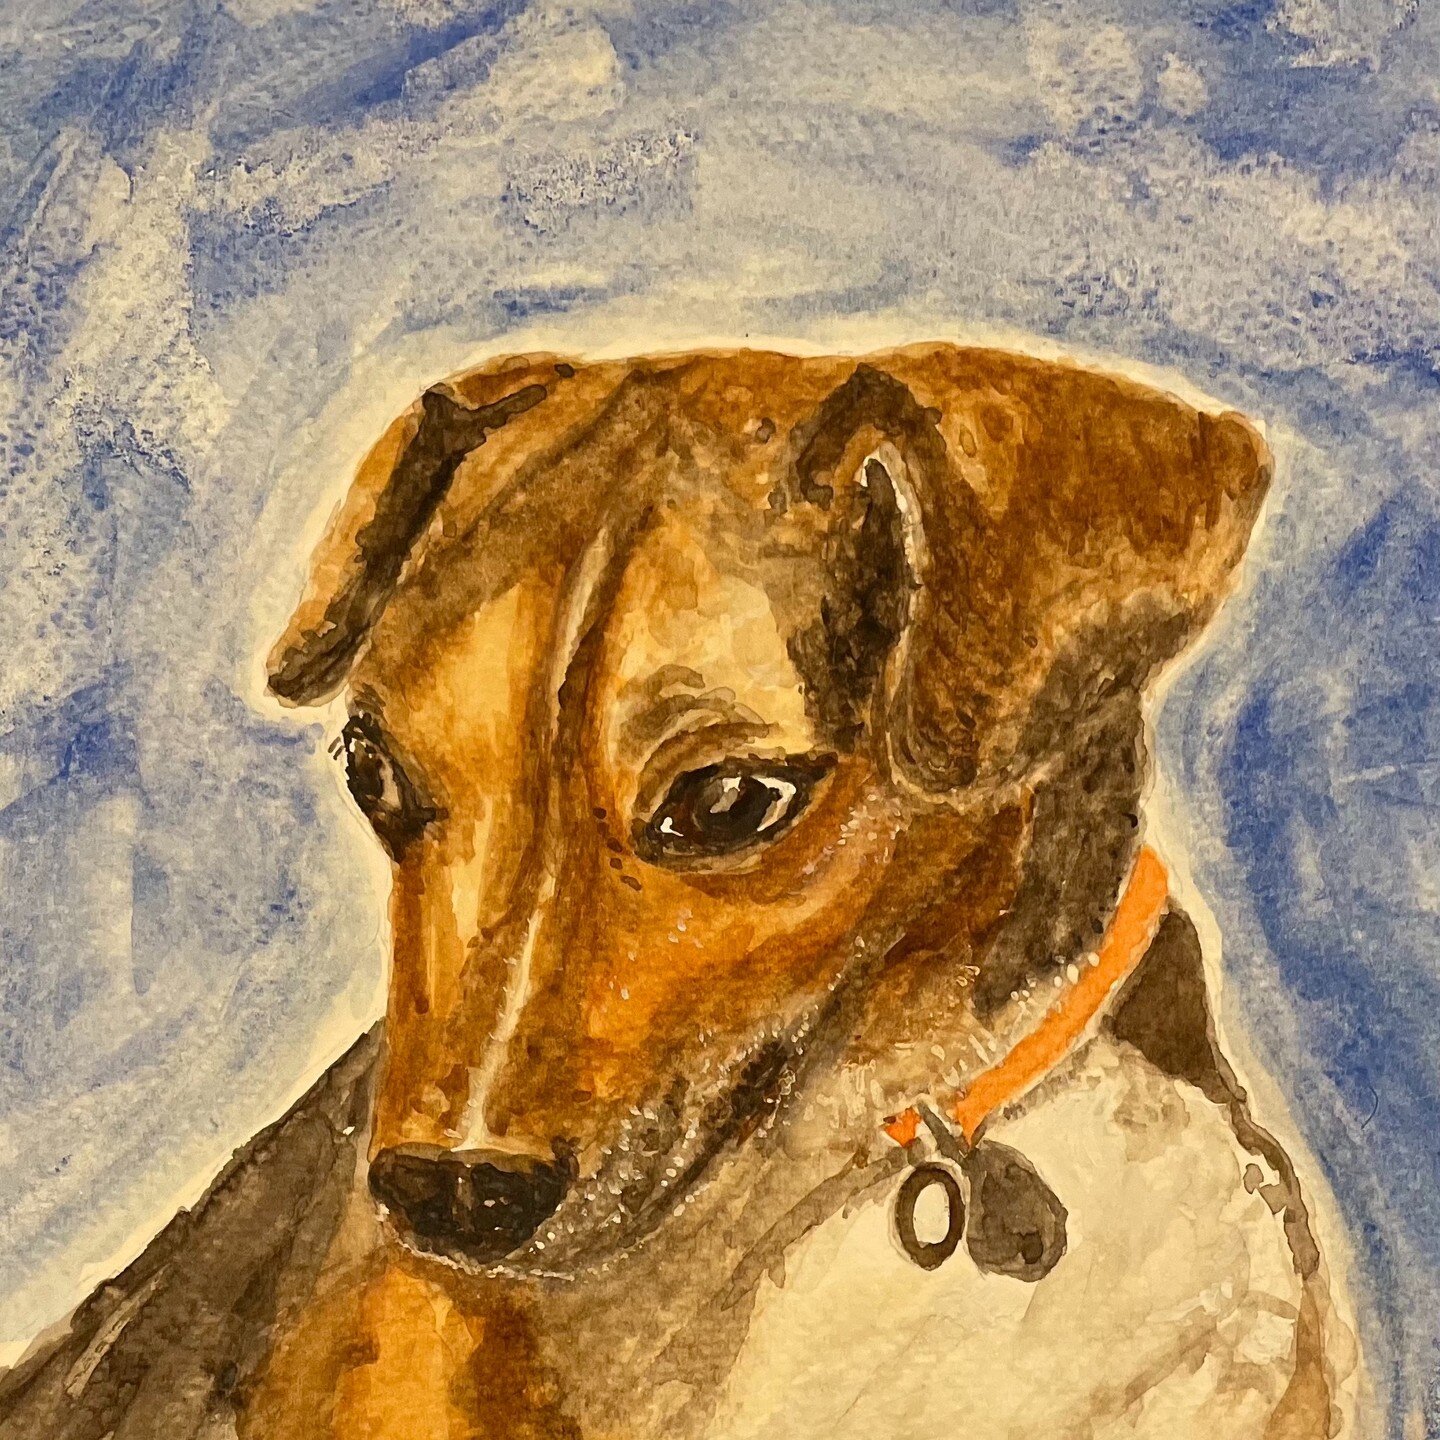 It's really, really challenging to paint your own dog in watercolor. Boomer is my amazing pooch!
#watercolor #lillstreetartcenter #winslowartcenter #dog #cindyheineman